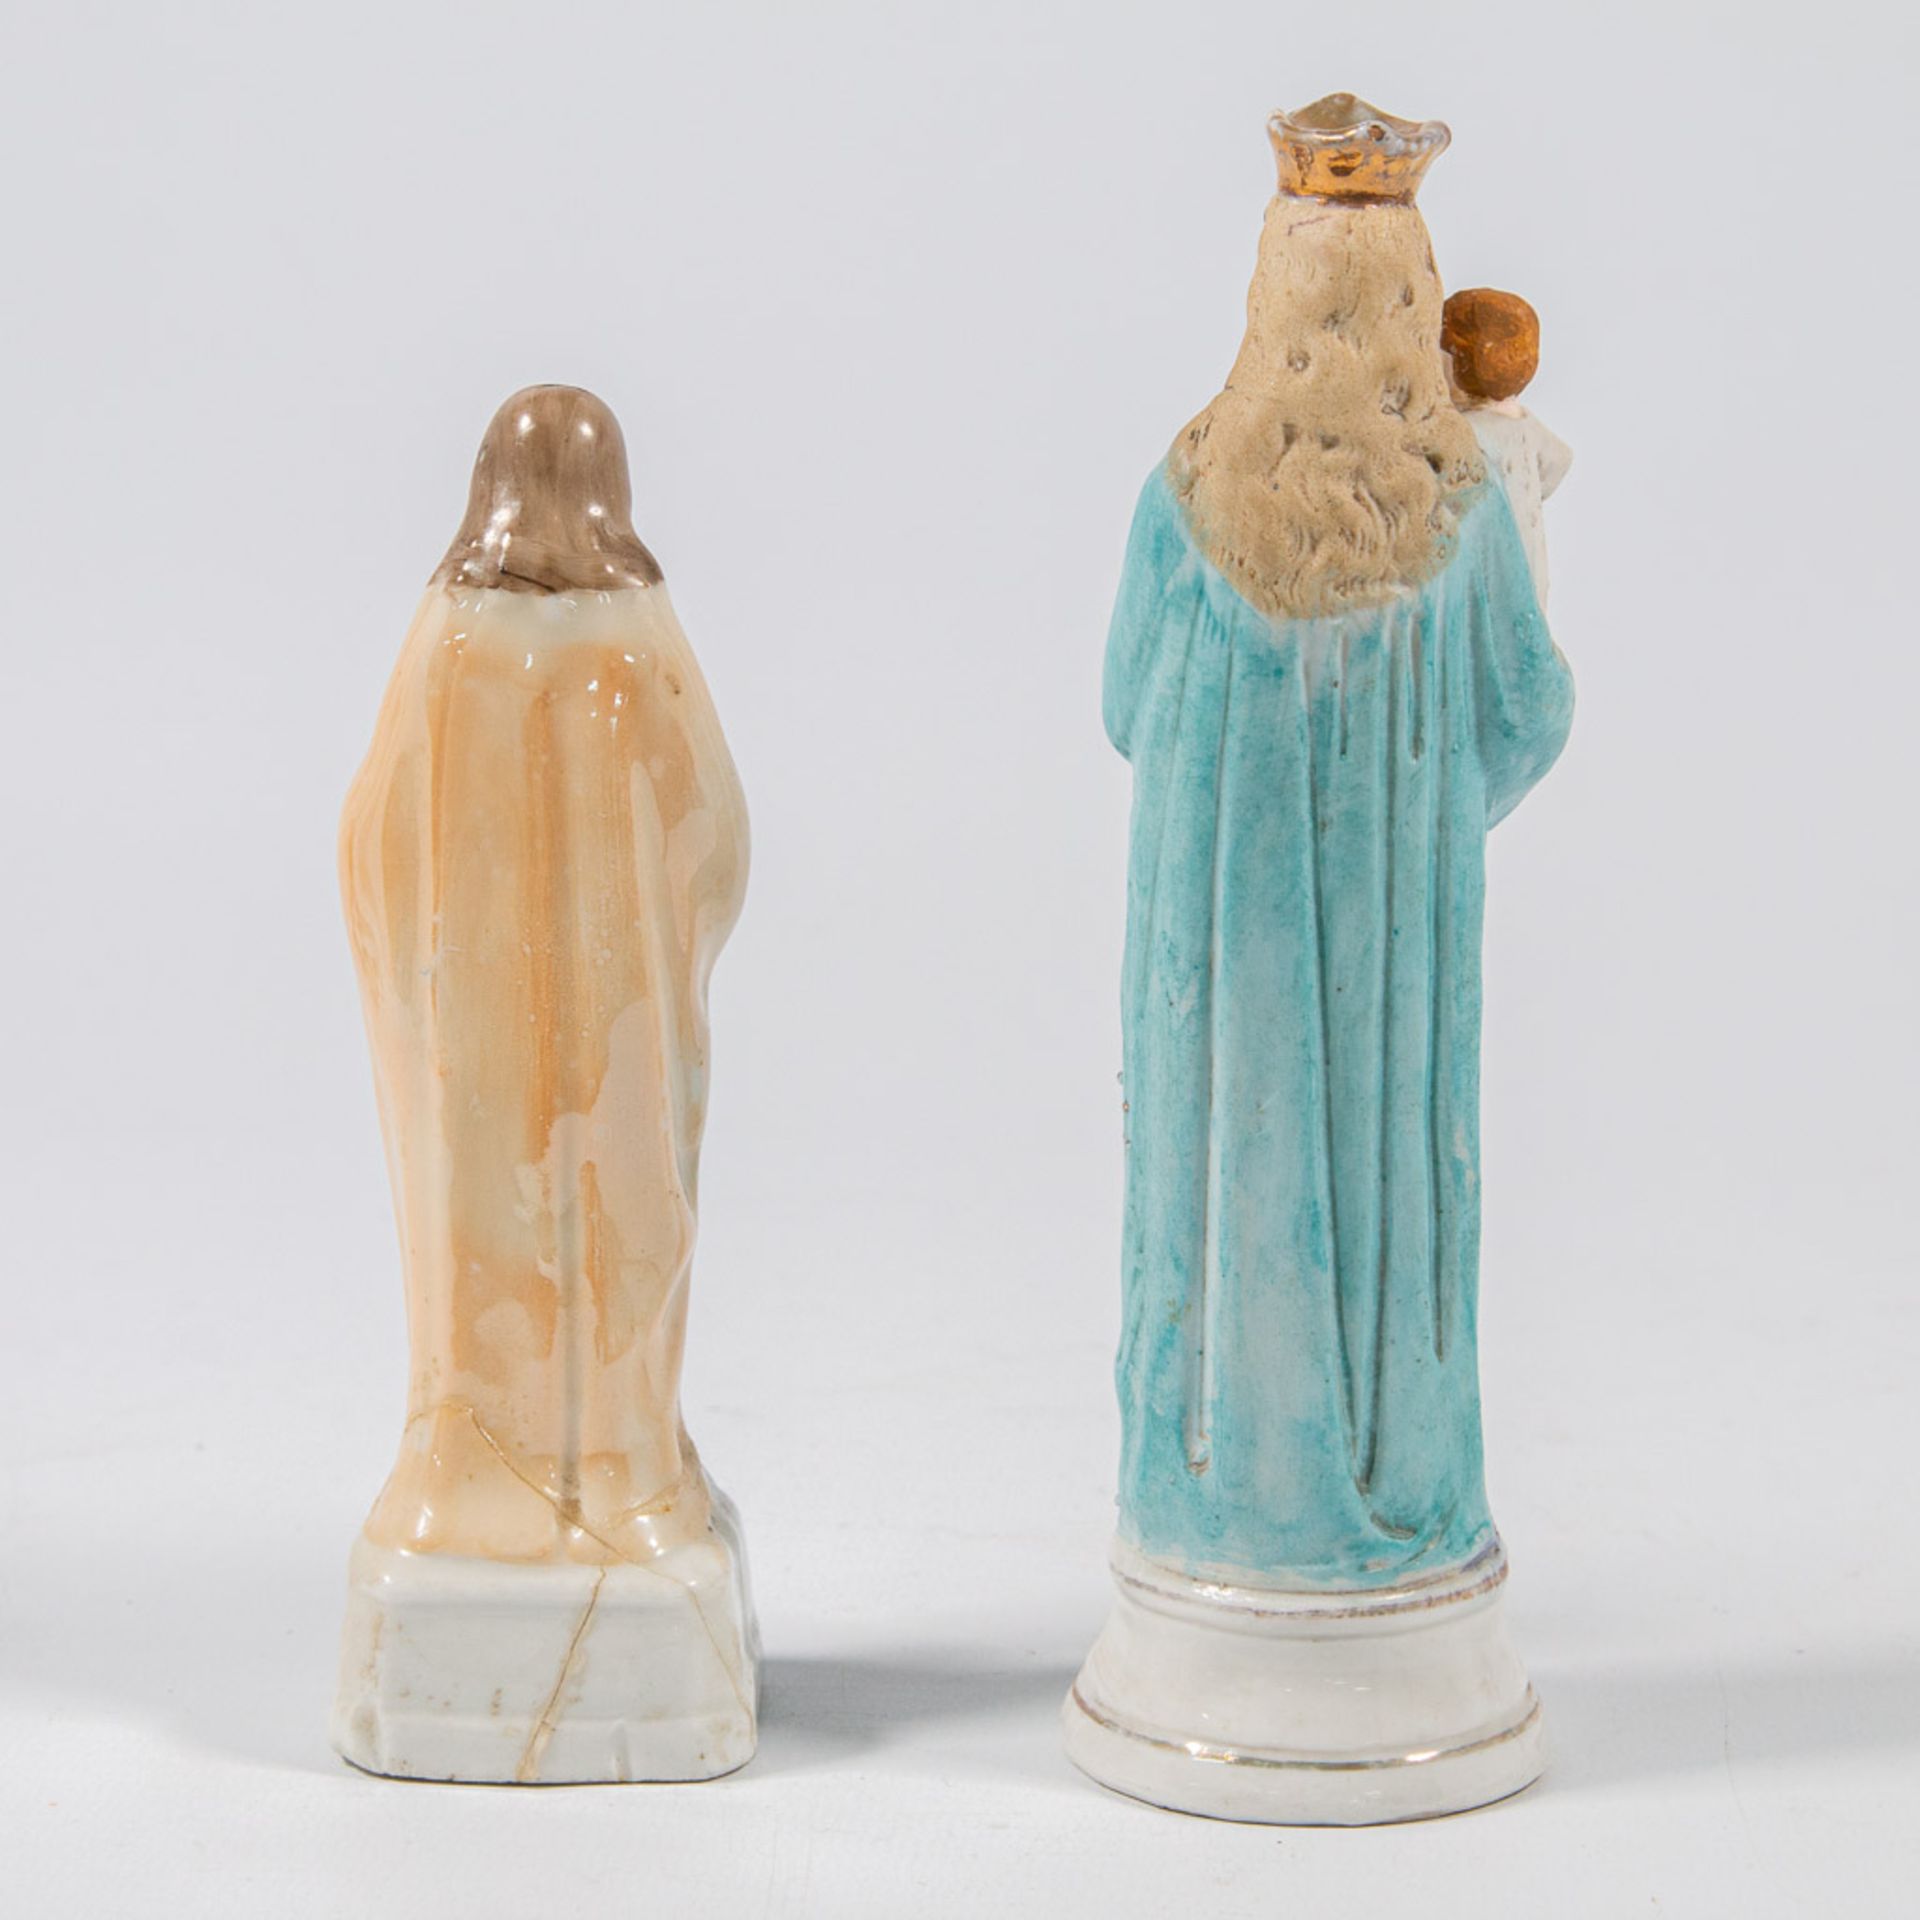 A collection of 11 bisque porcelain holy statues, Mary, Joseph, and Madonna. - Image 20 of 49